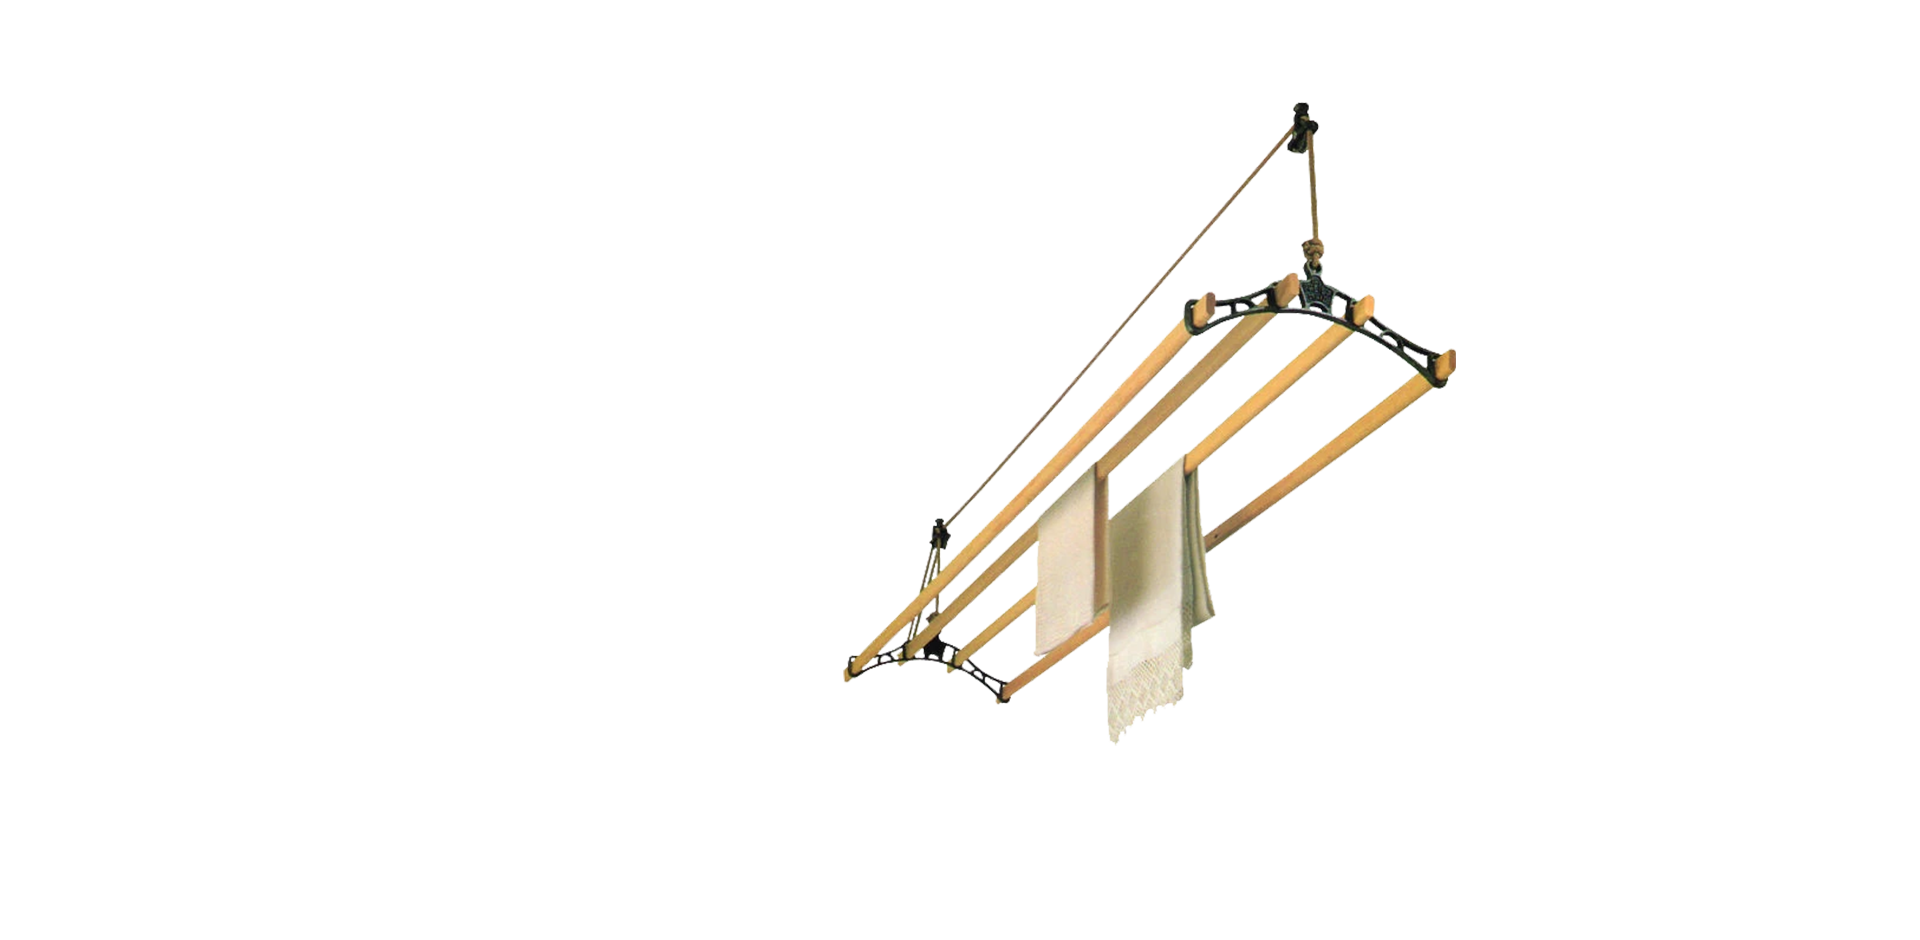 sheila maid clothes airer Ceiling Airer PulleyPulley